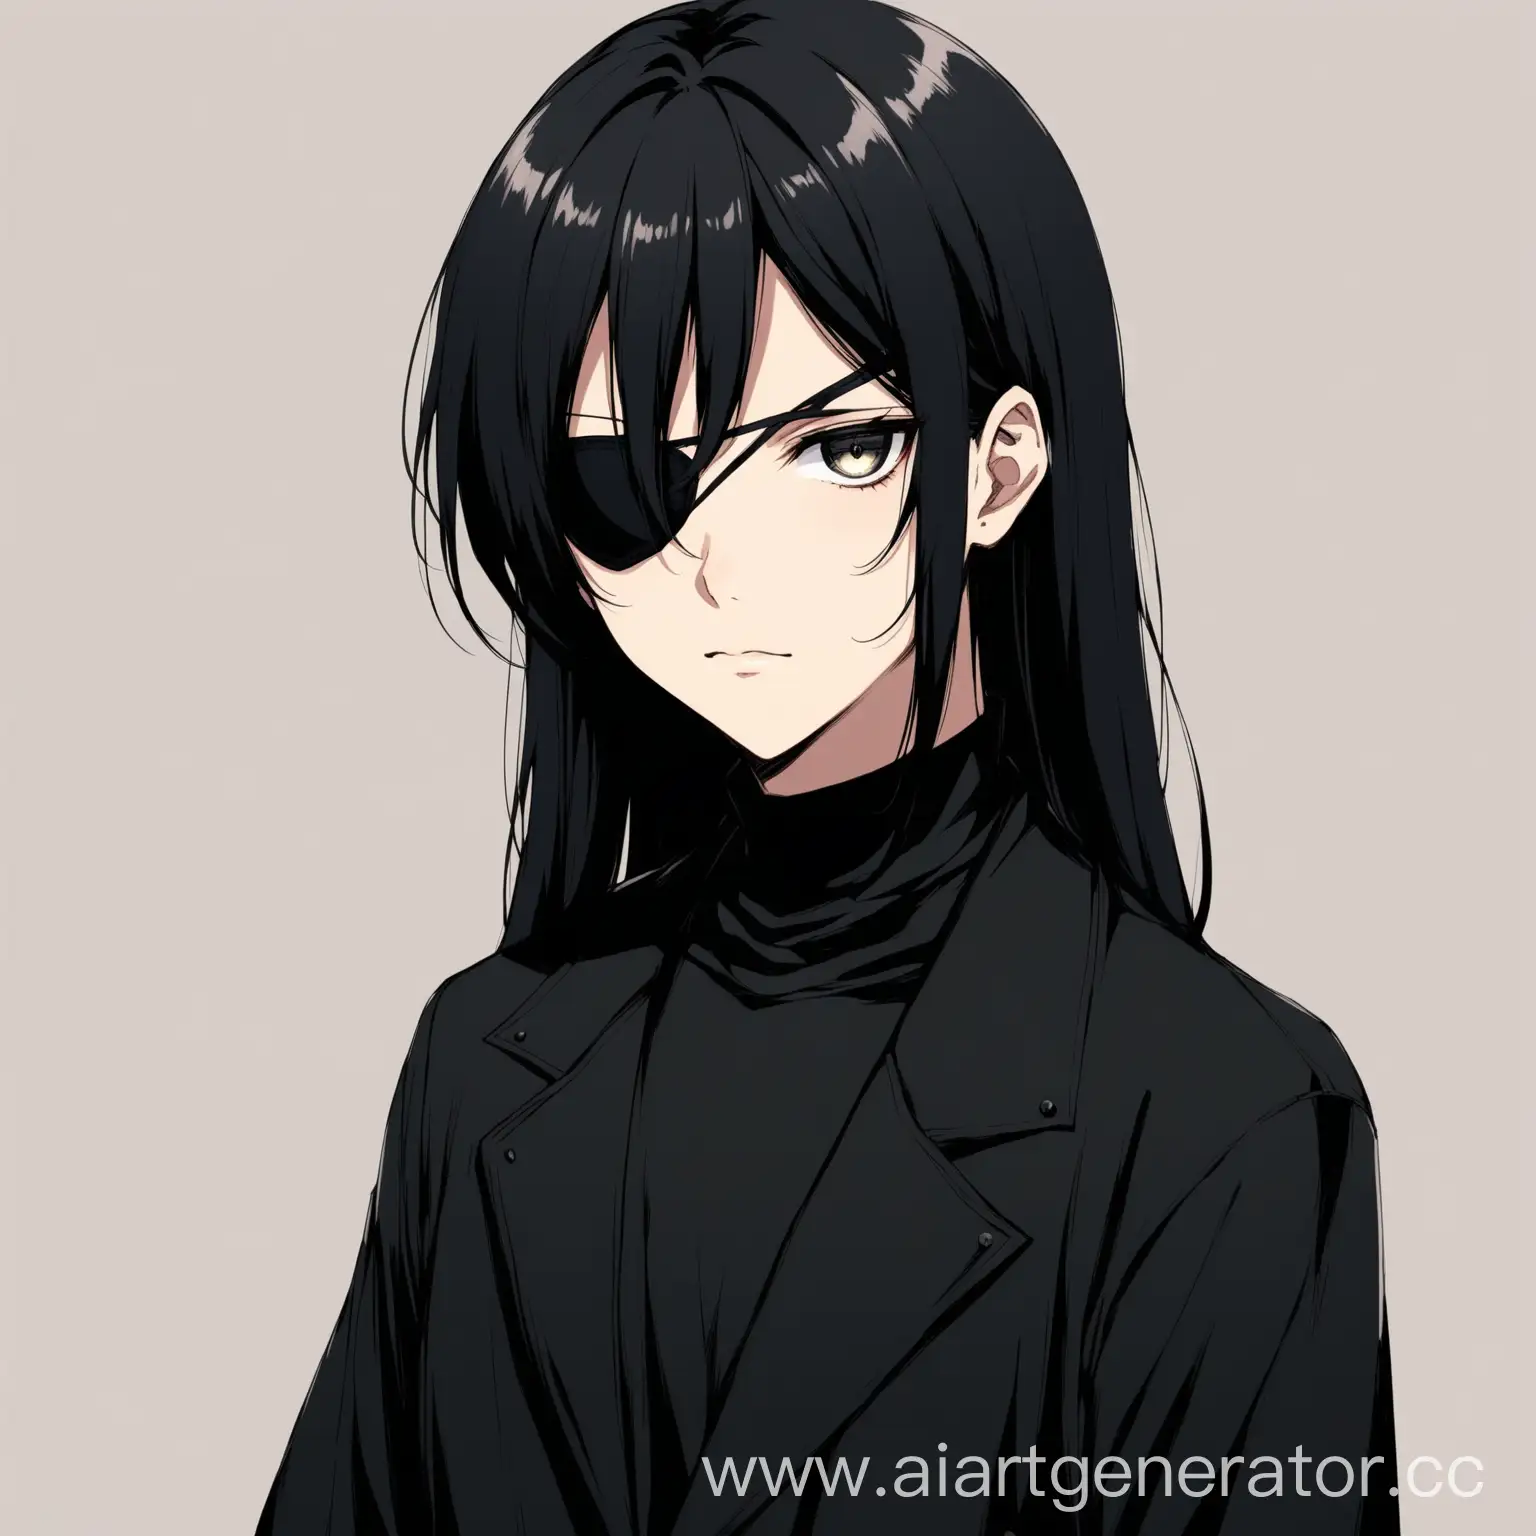 Anime-Style-Character-Mysterious-Figure-with-Straight-Black-Hair-and-Eye-Patch